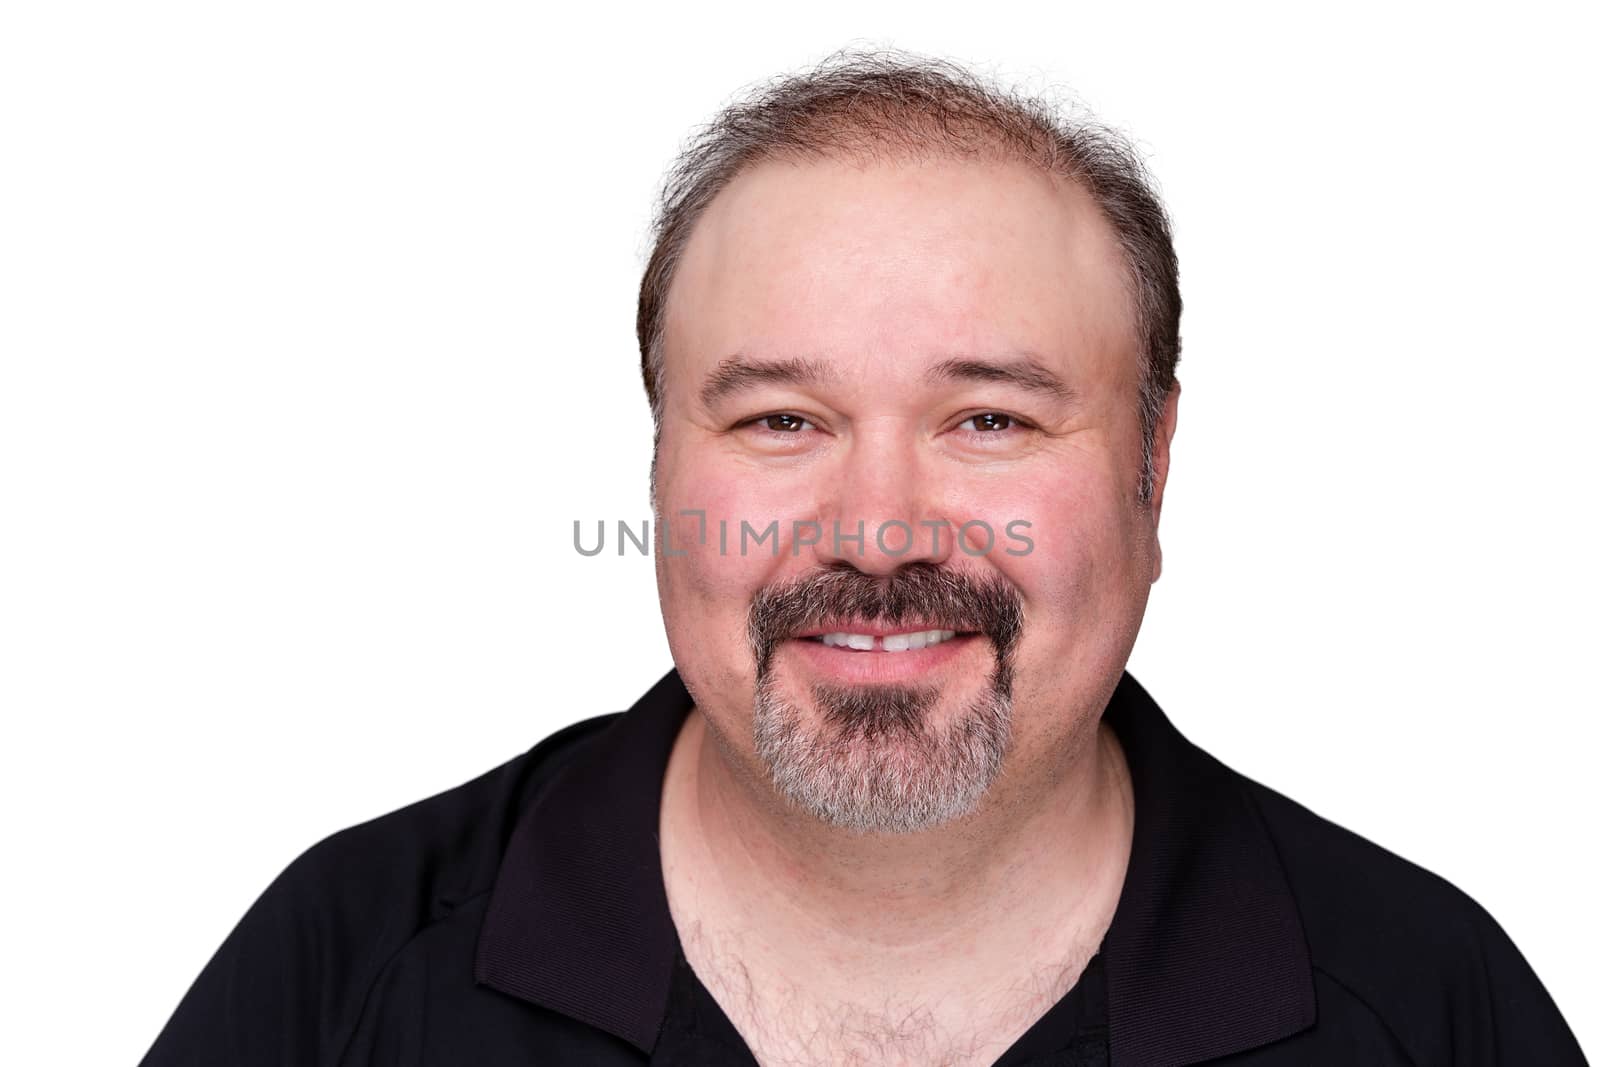 Smiling happy middle-aged man with a goatee beard looking at the camera with a warm friendly smile, isolated on white